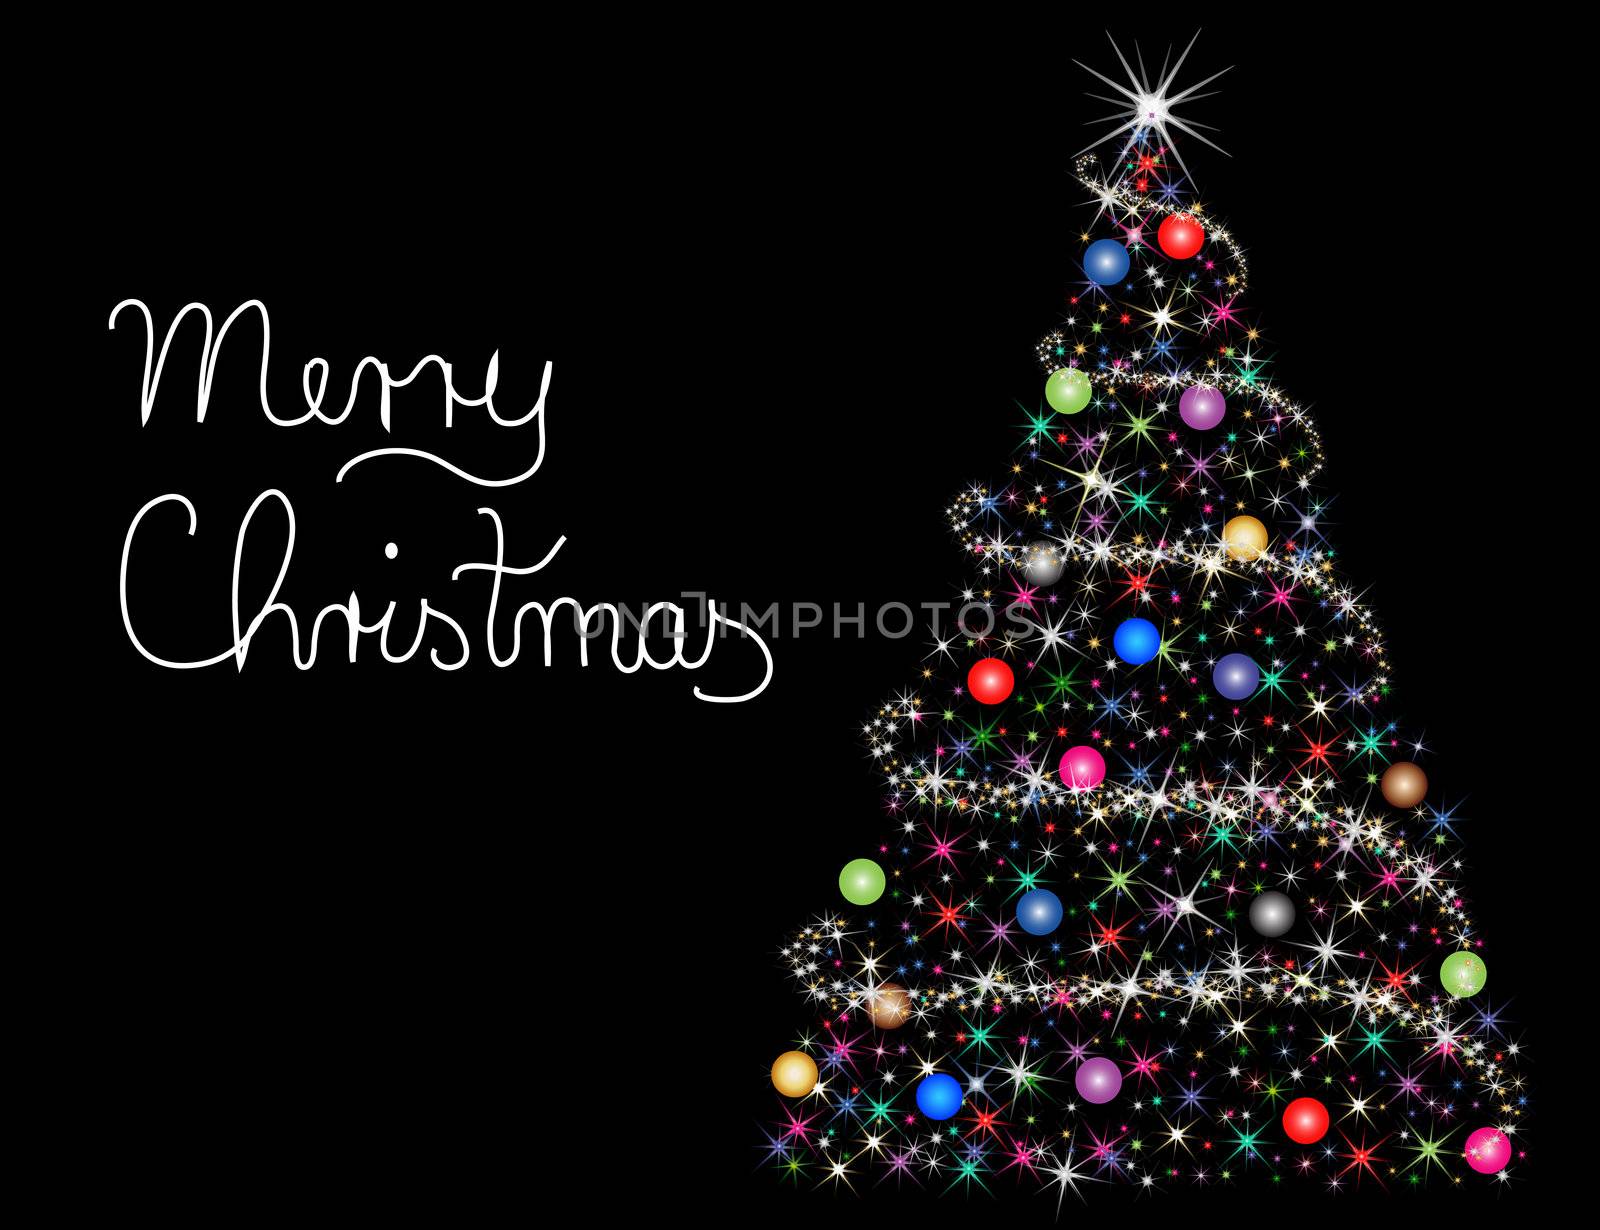 Merry Christmas Card by peromarketing